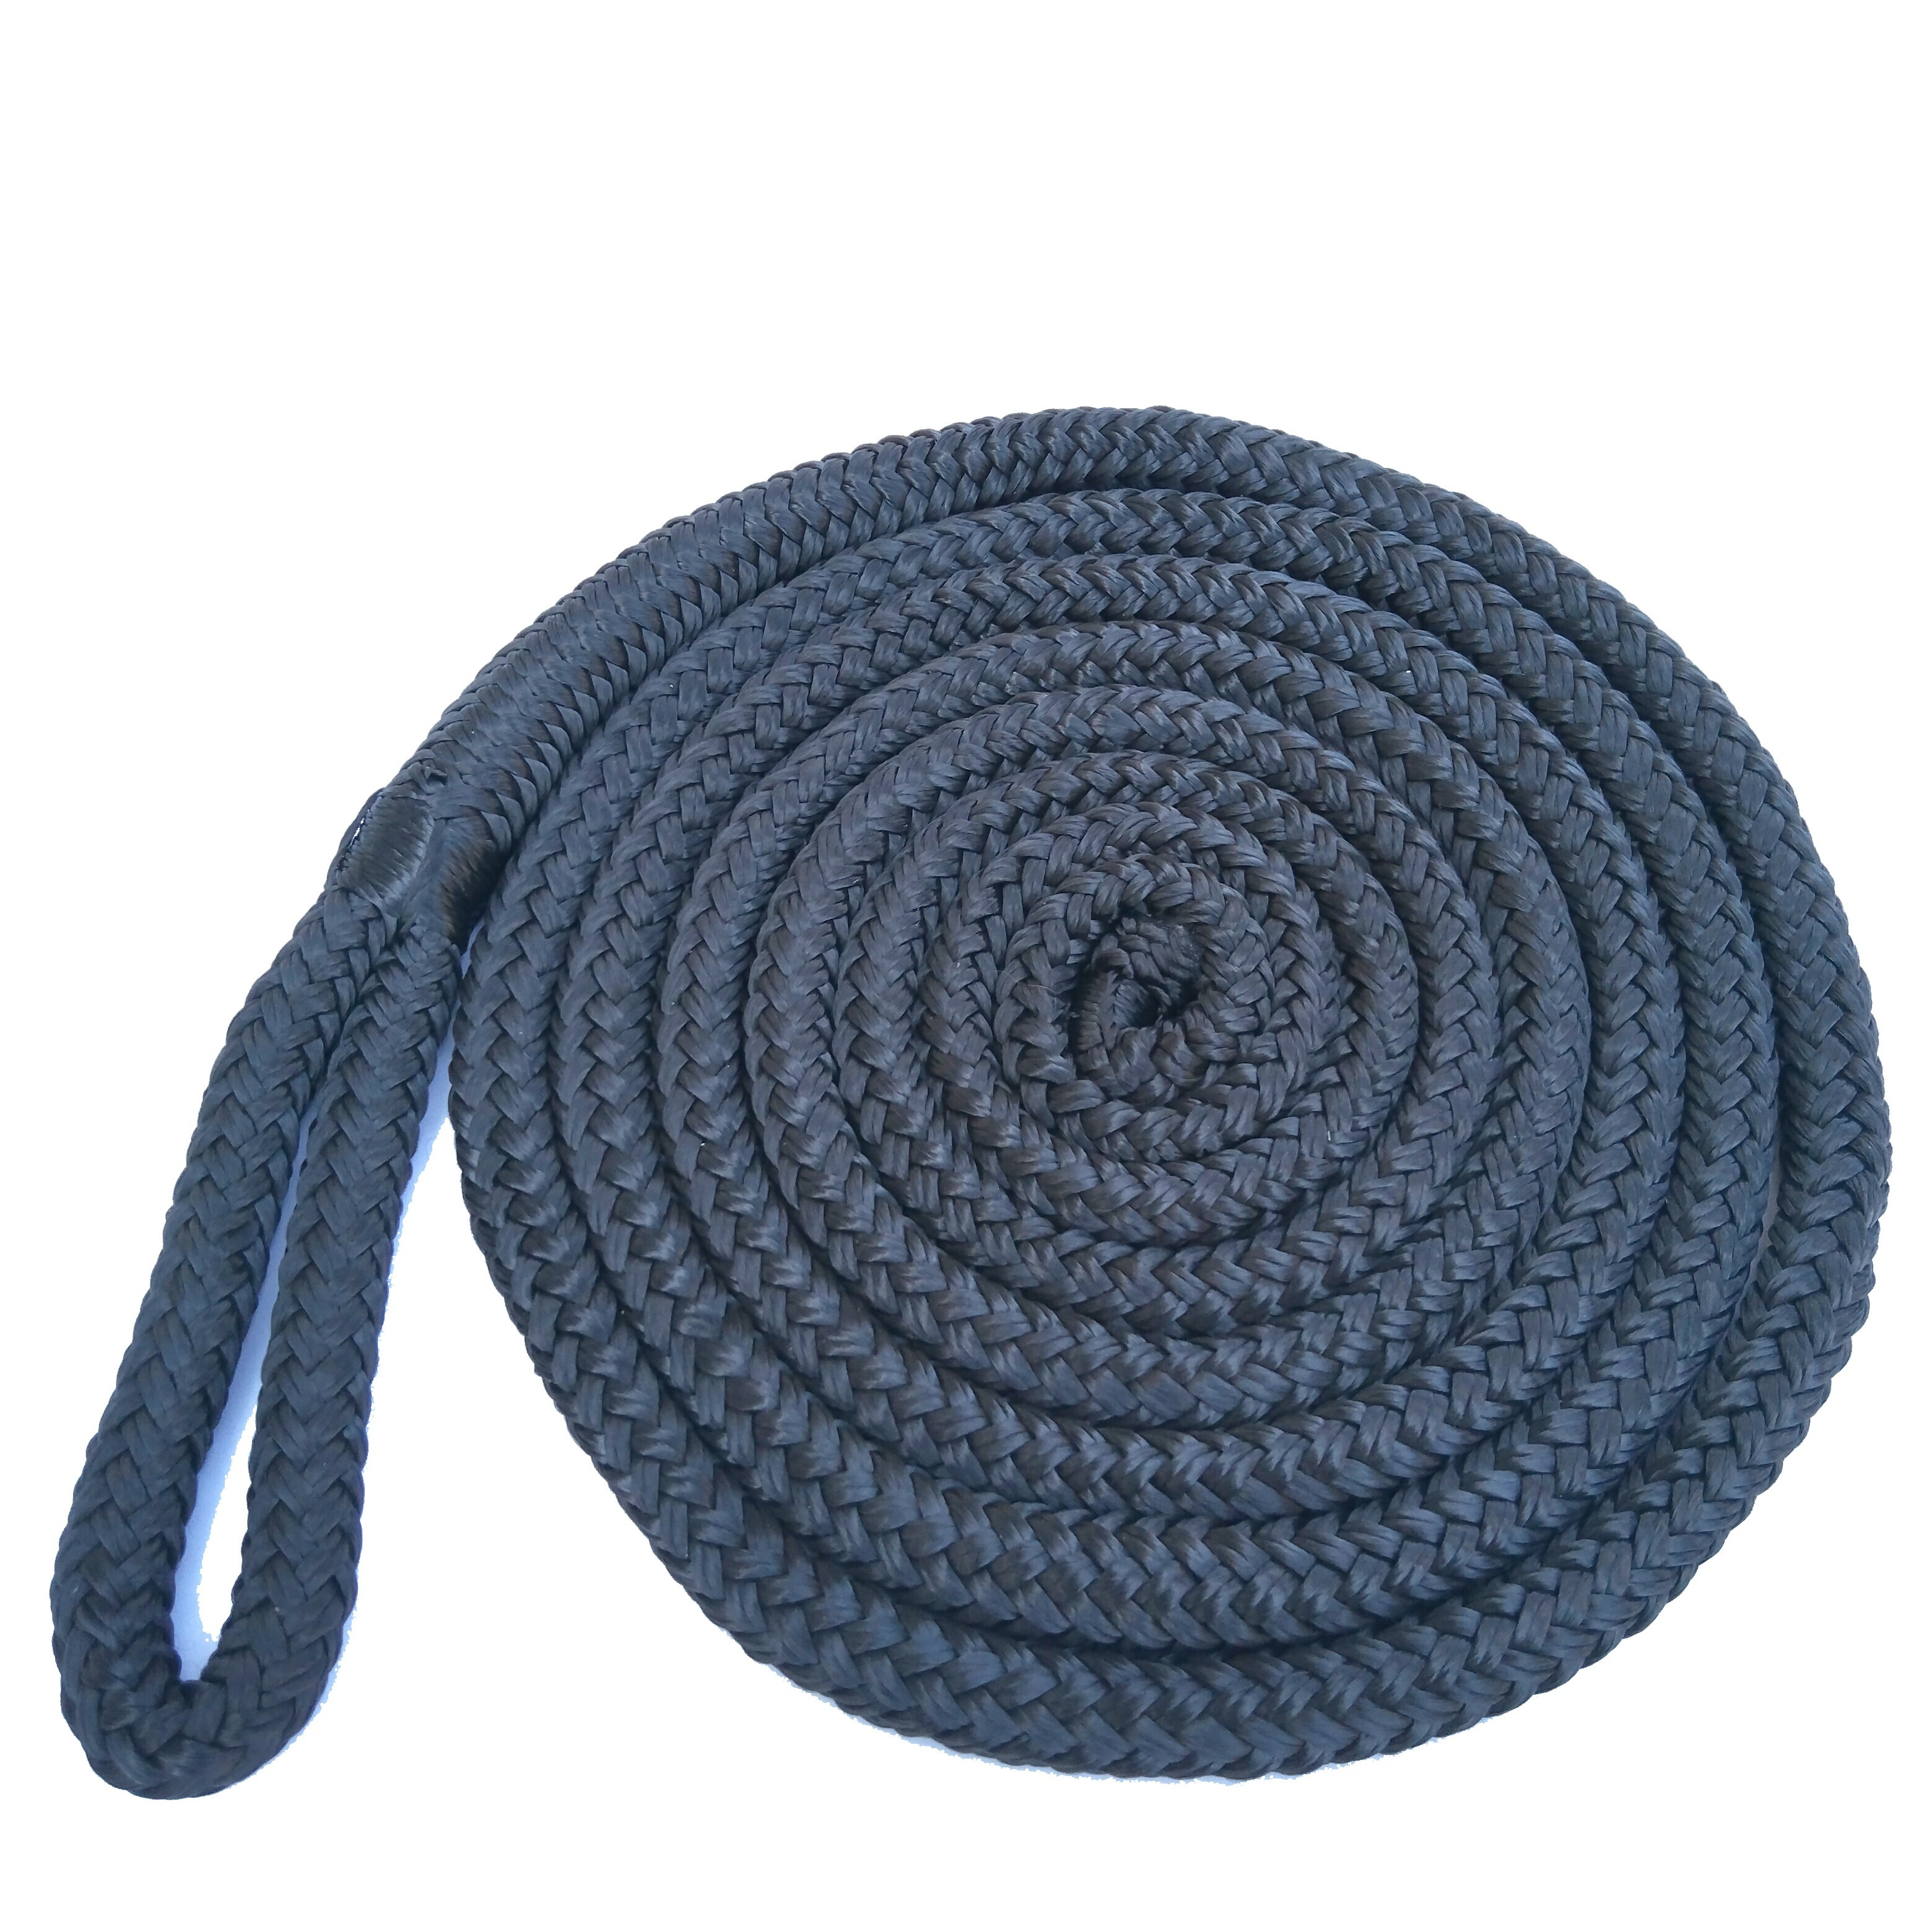 

4-pack Of Heavy-duty Double Braided Nylon Dock Lines - 15ft, 6000lbs Breaking Strength, 12in Eye - Perfect For Marine Rope!